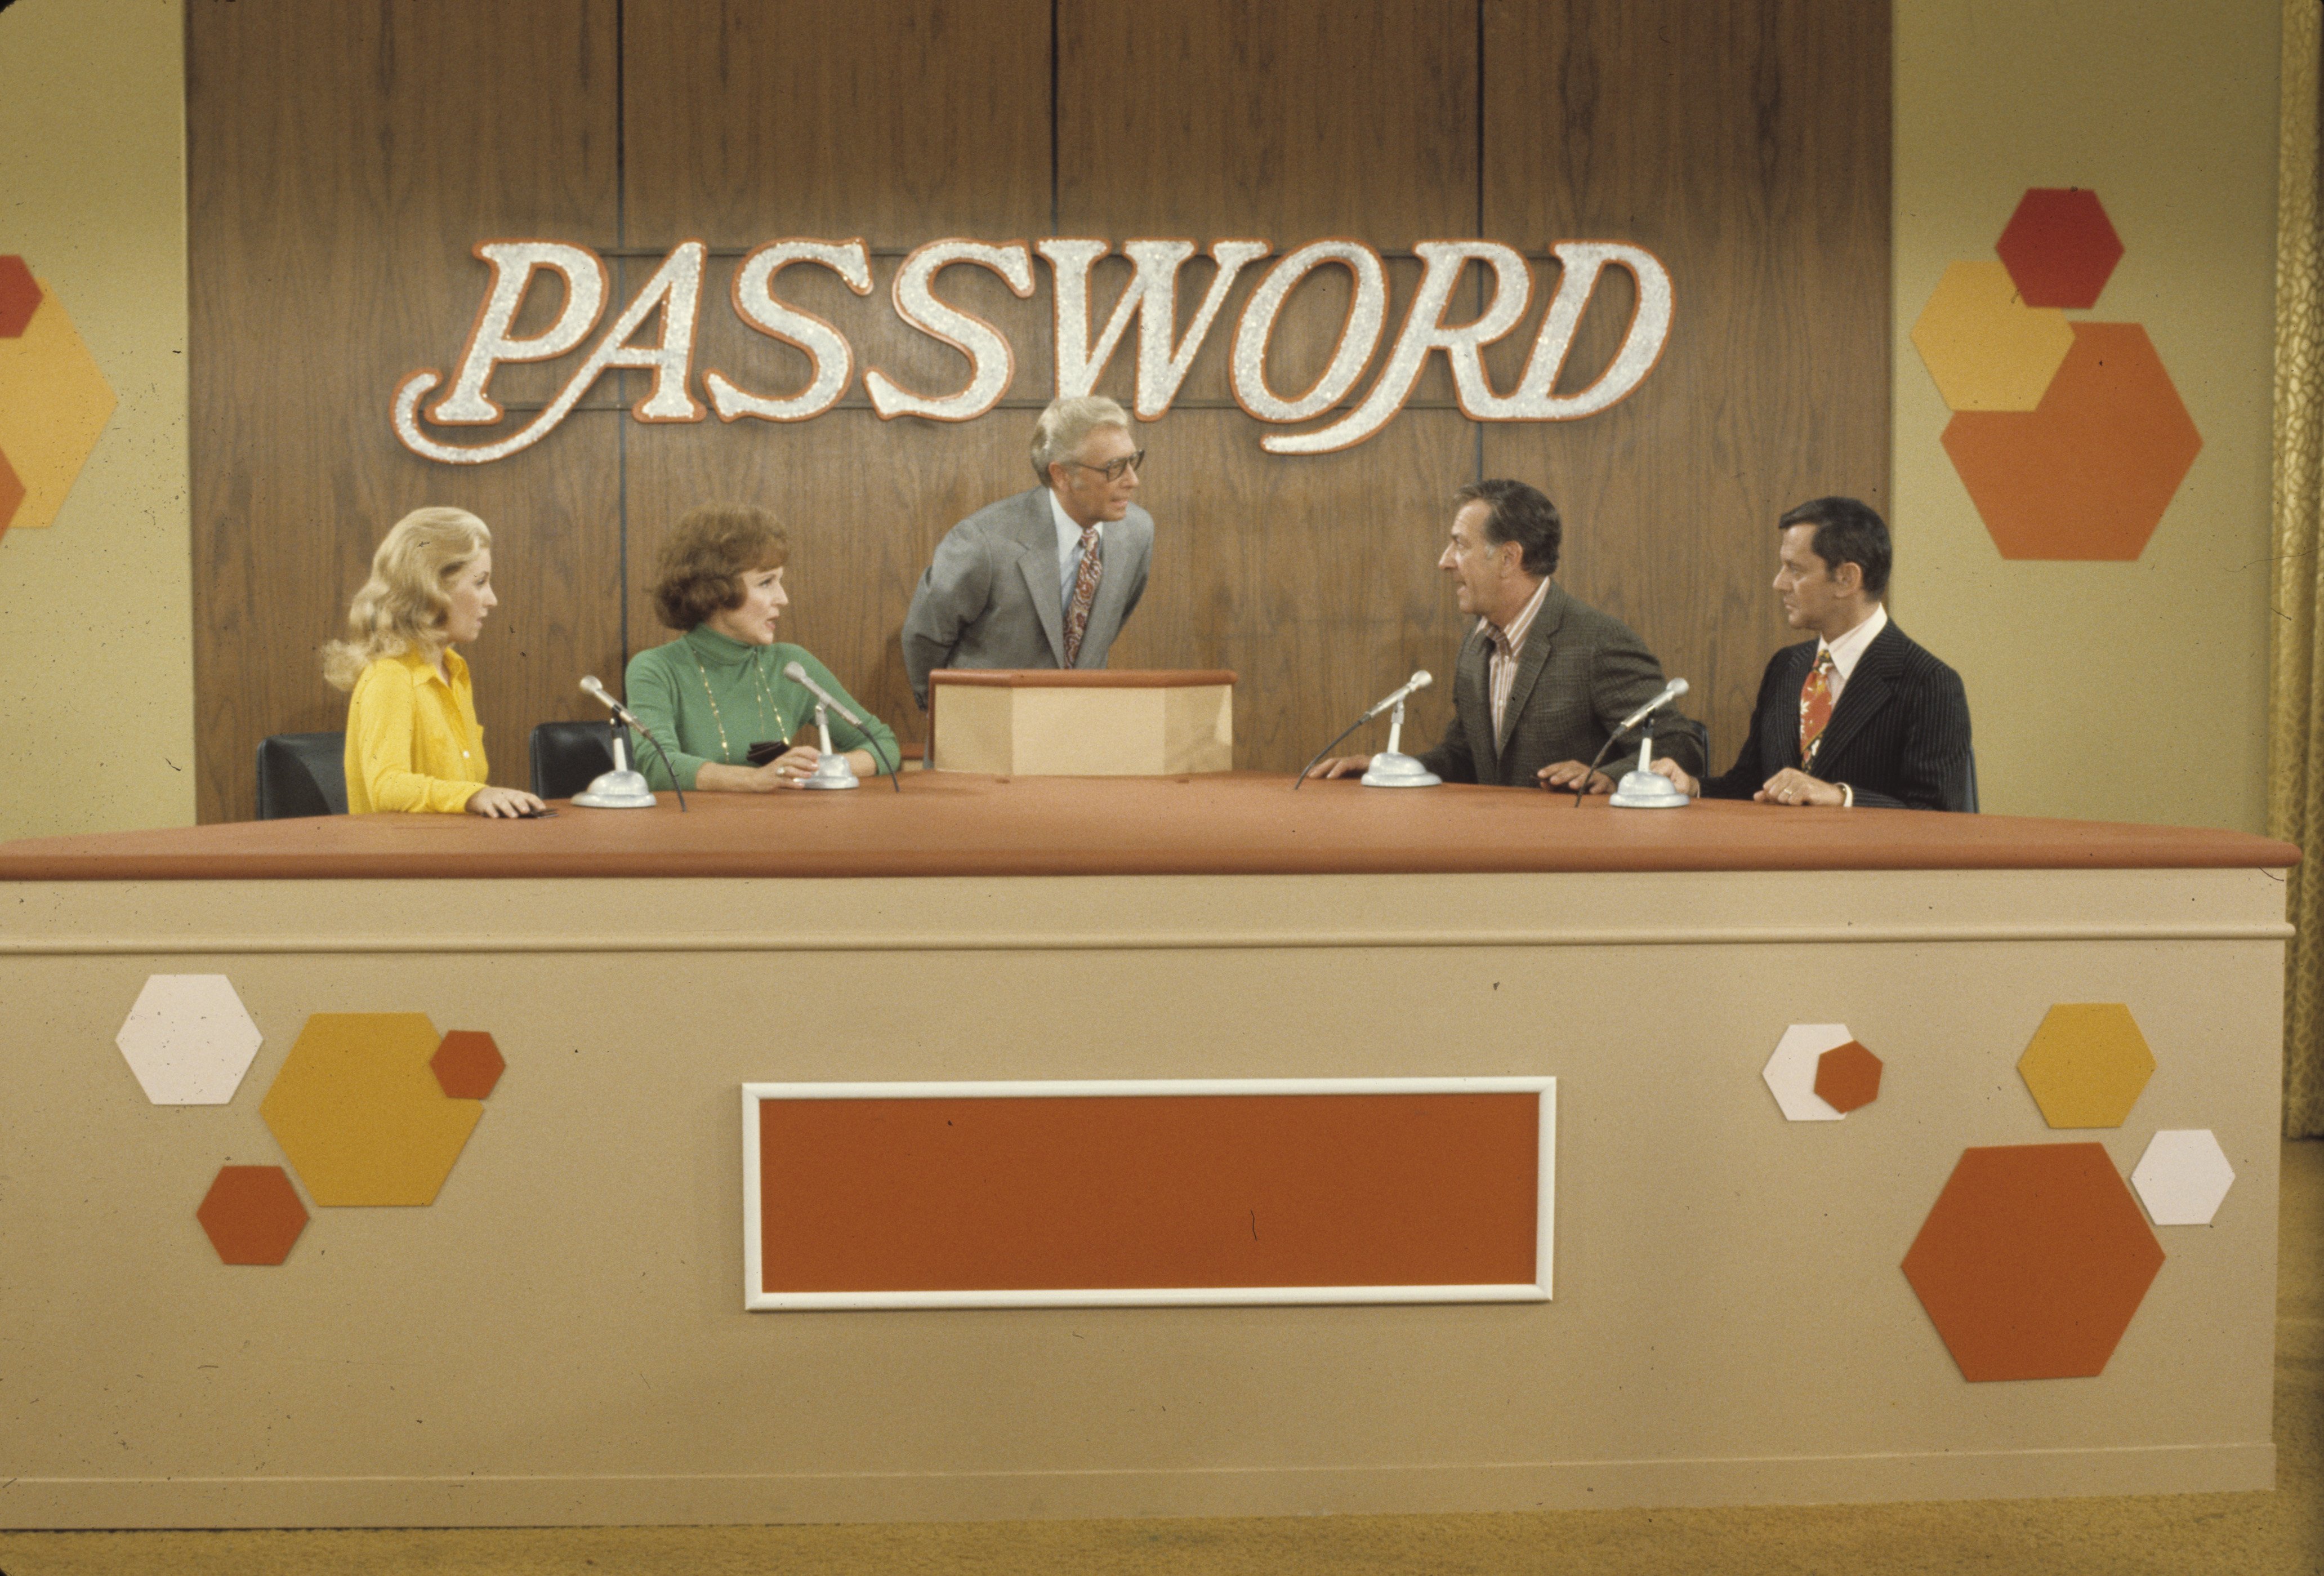 Betty White, Allen Ludden, Jack Klugman, Tony Randall during the taping of the game show, "Password" on December 1, 1972 ┃ Source: Getty Images